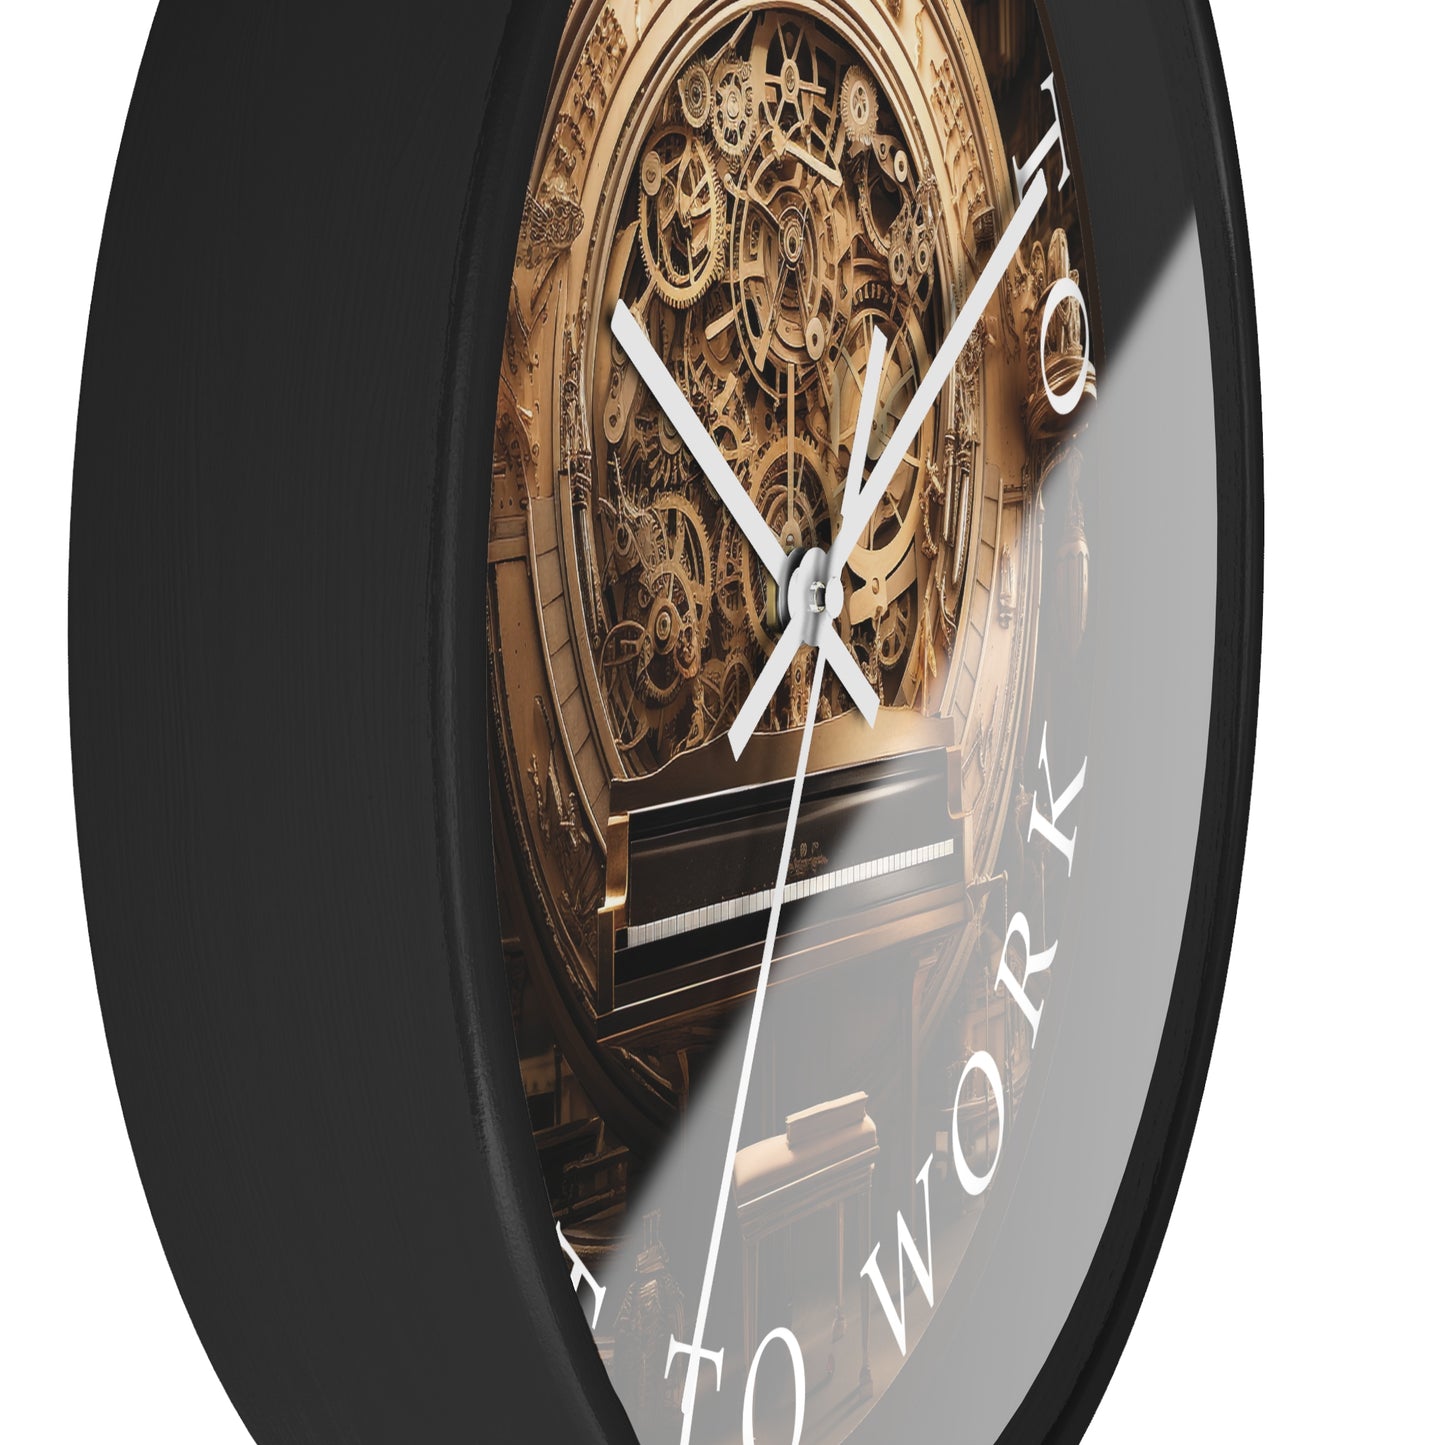 It's TIME to GET to WORK  music-themed 10" Wall Clock, with a piano in a surrealistic clock gear room, 2" black frame and plexiglass front